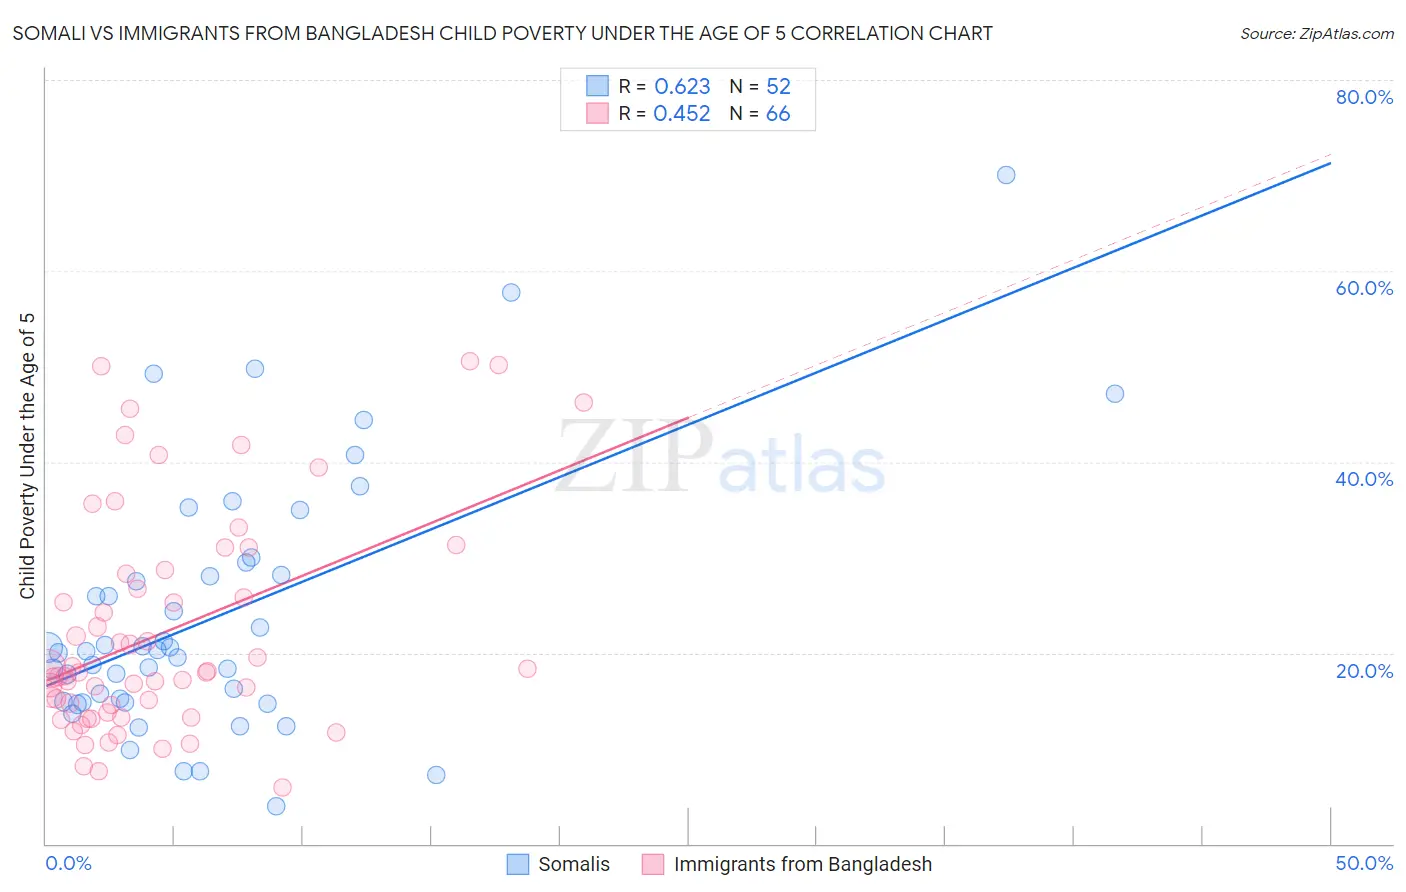 Somali vs Immigrants from Bangladesh Child Poverty Under the Age of 5